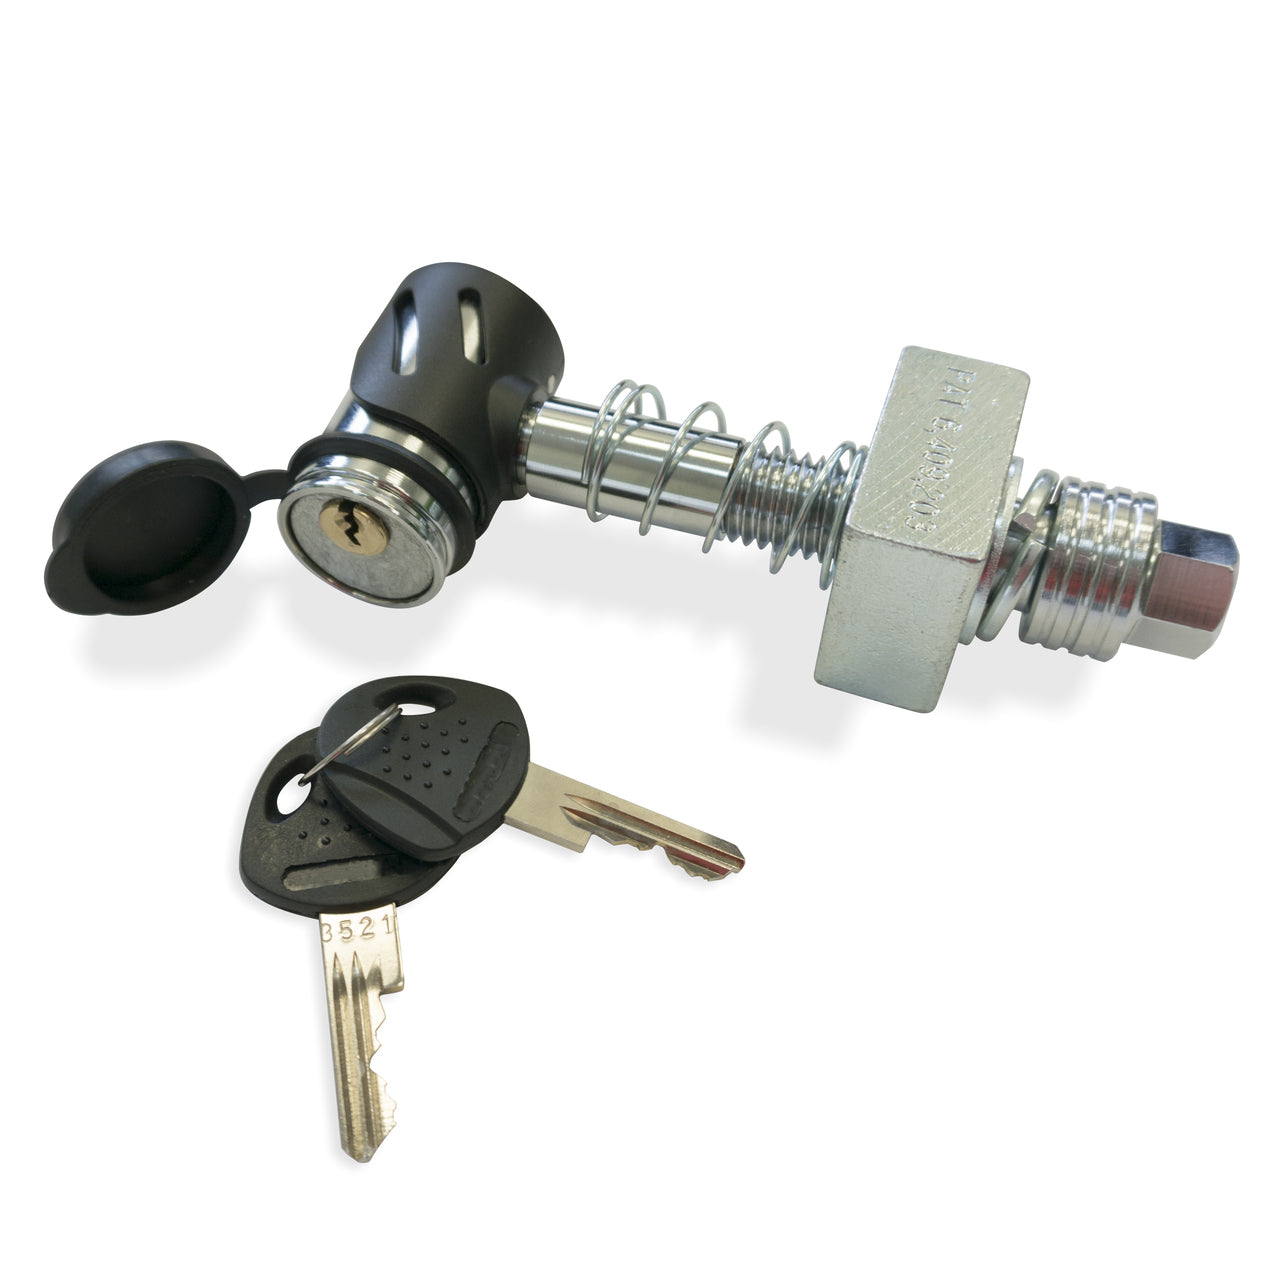 Let's Go Aero (SHP2040) Keyless Press-On Locking Silent Hitch Pin for 2in Hitches